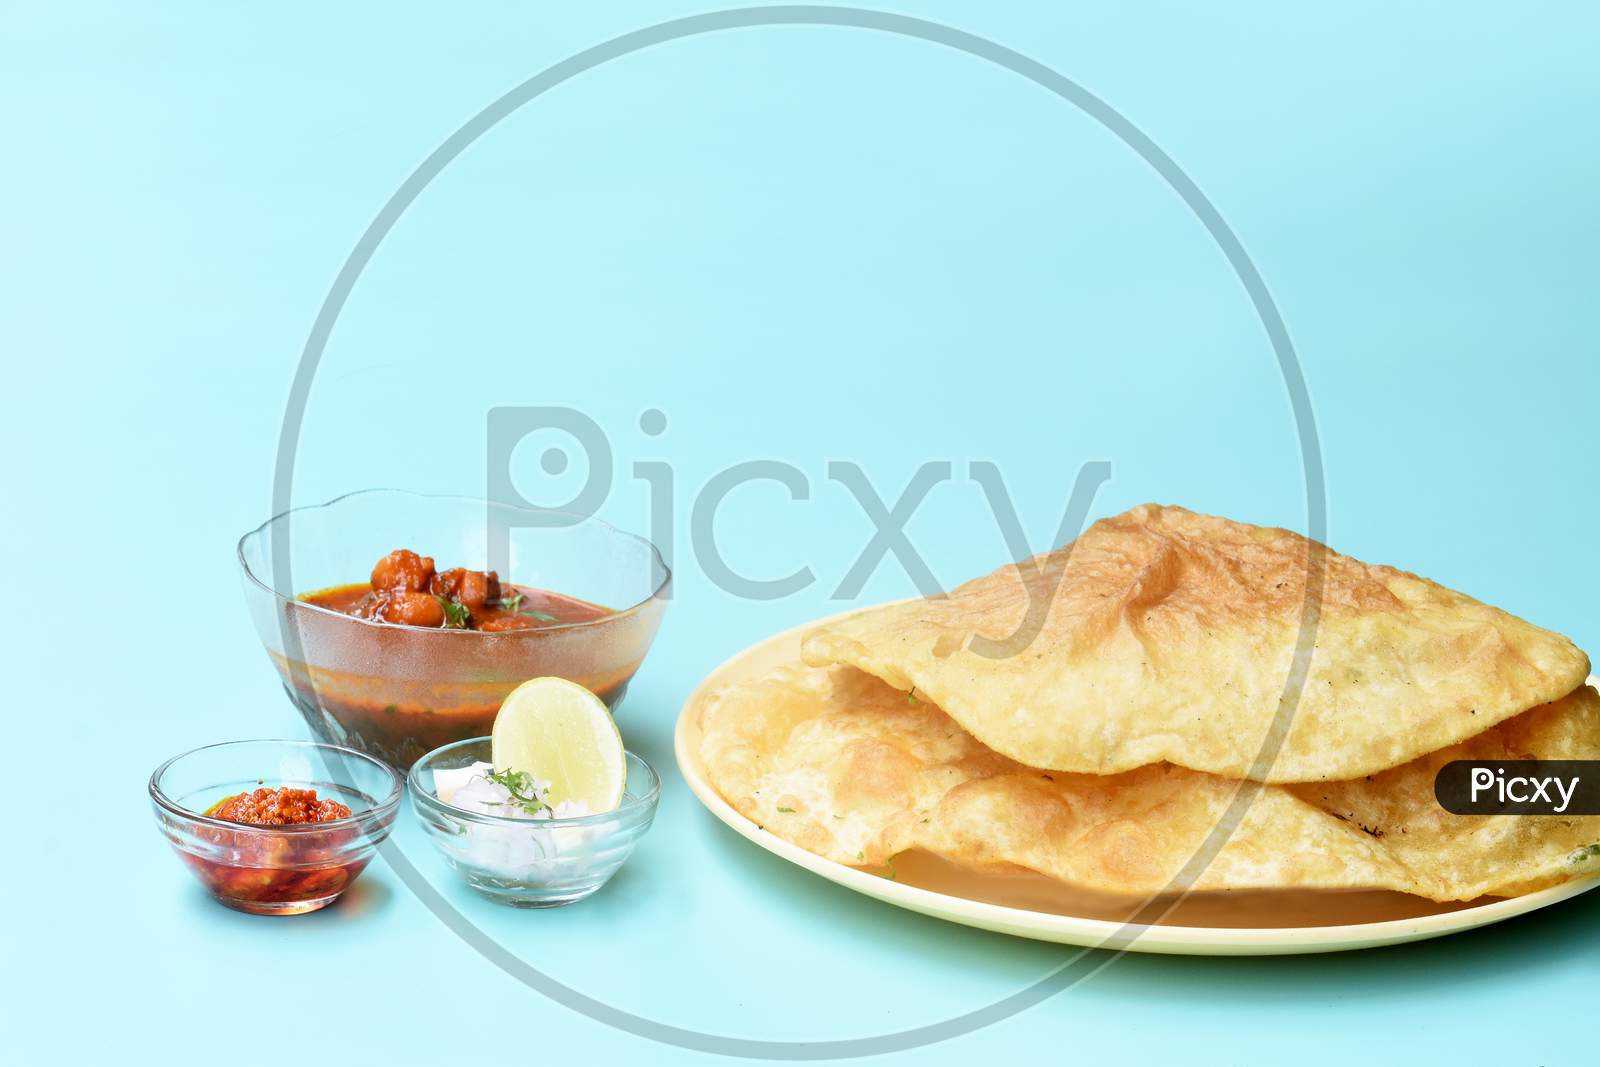 Indian Dish Spicy Chick Peas Curry Also Known As Chole Bhatura And Chana Masala Or Chole Or Chickpeas Masala Curry,Traditional North Indian Lunch Served With Fried Puri Or Flatbreads,Selective Focus